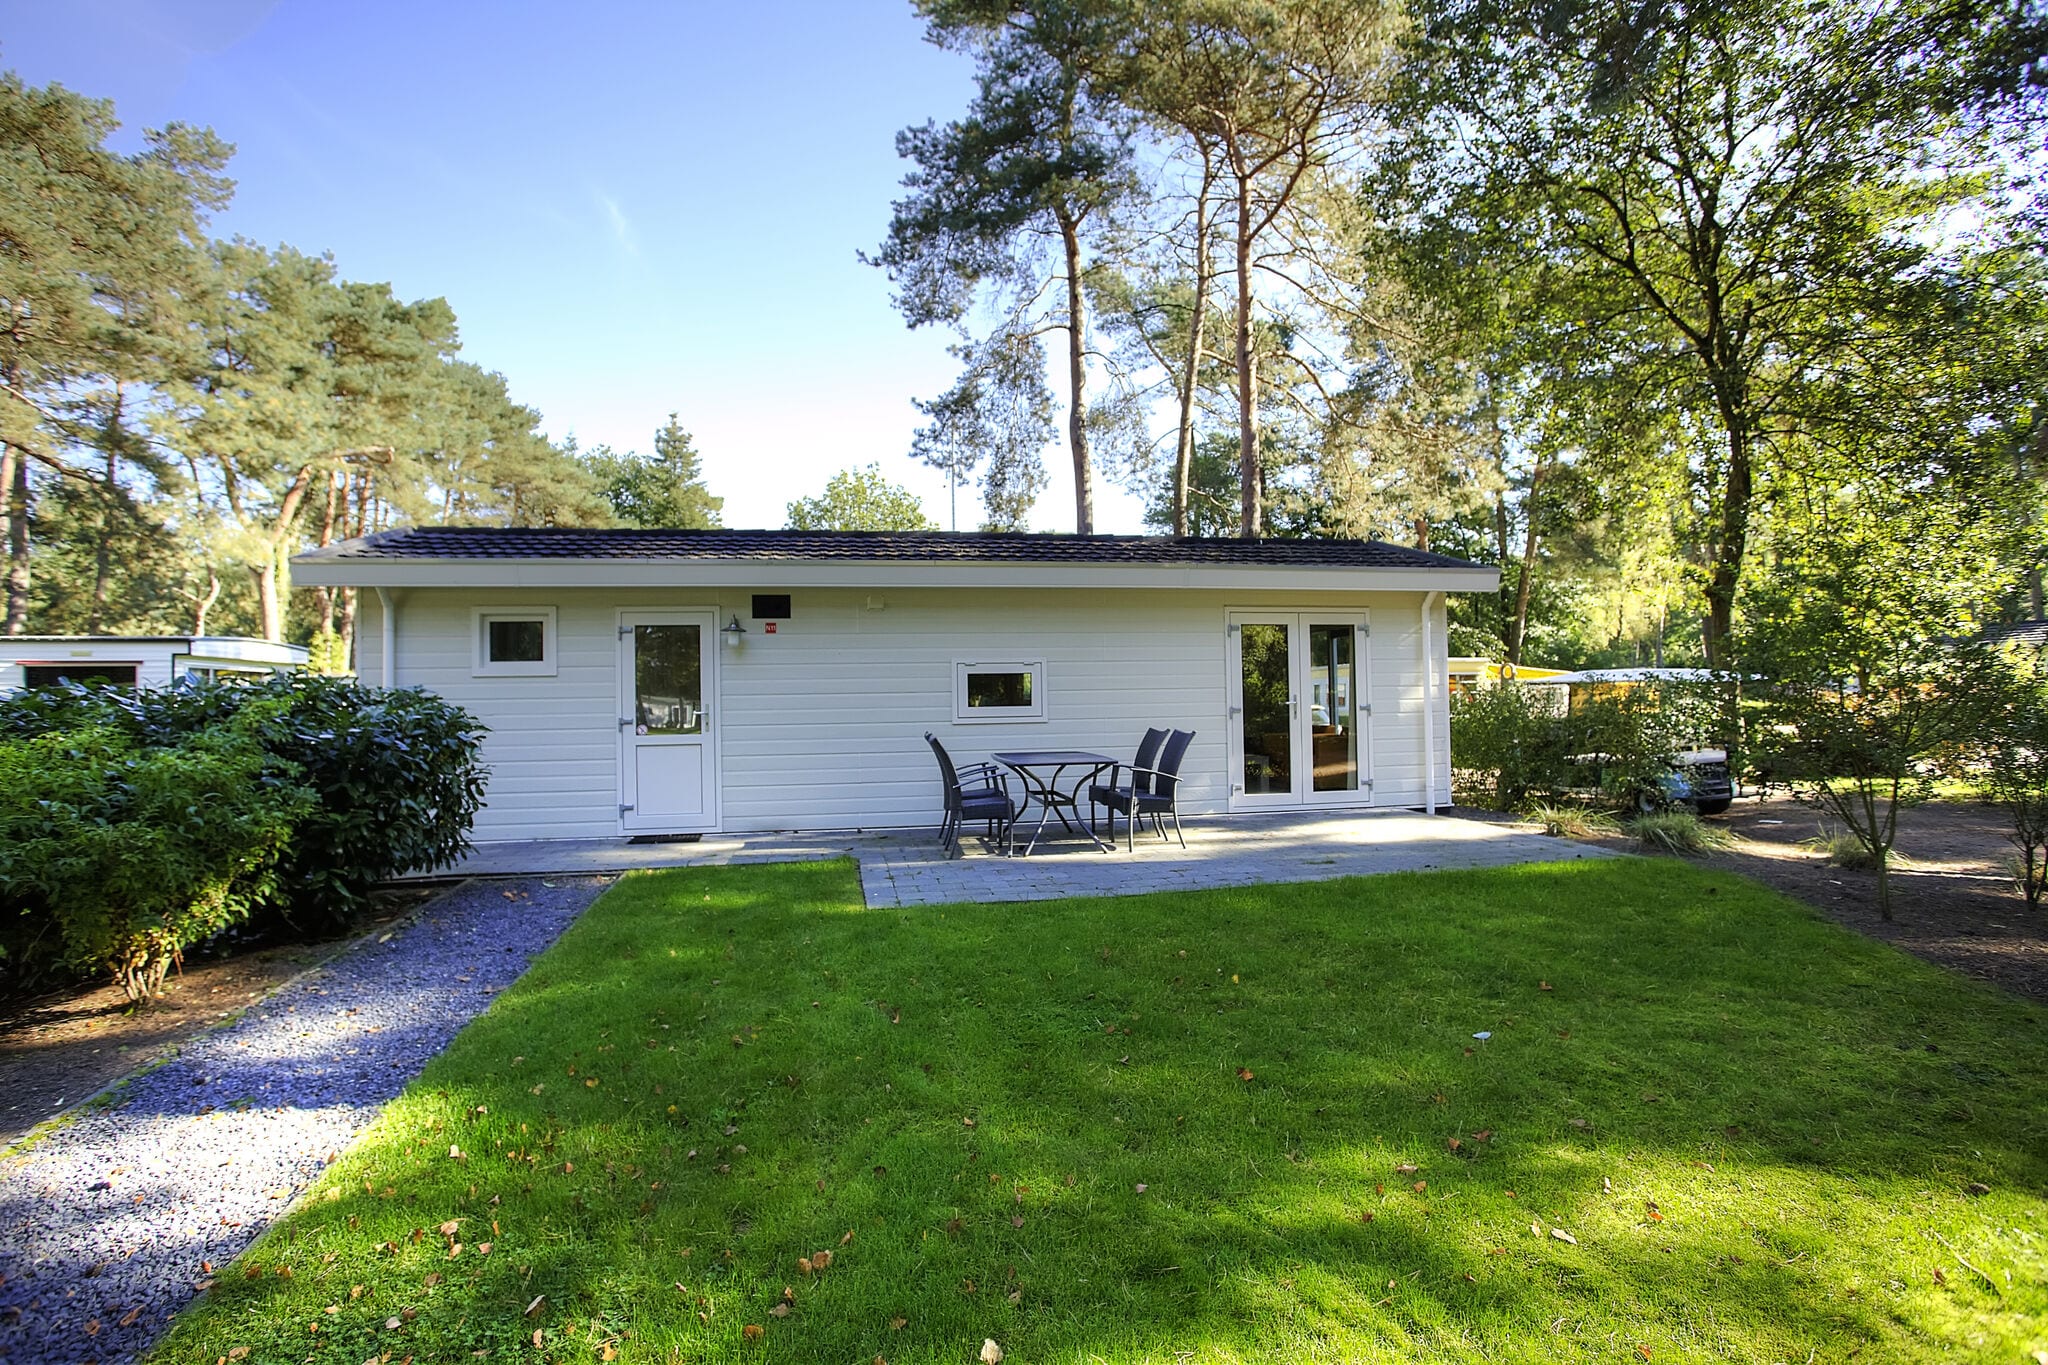 Chalet with a dishwasher on the Veluwe